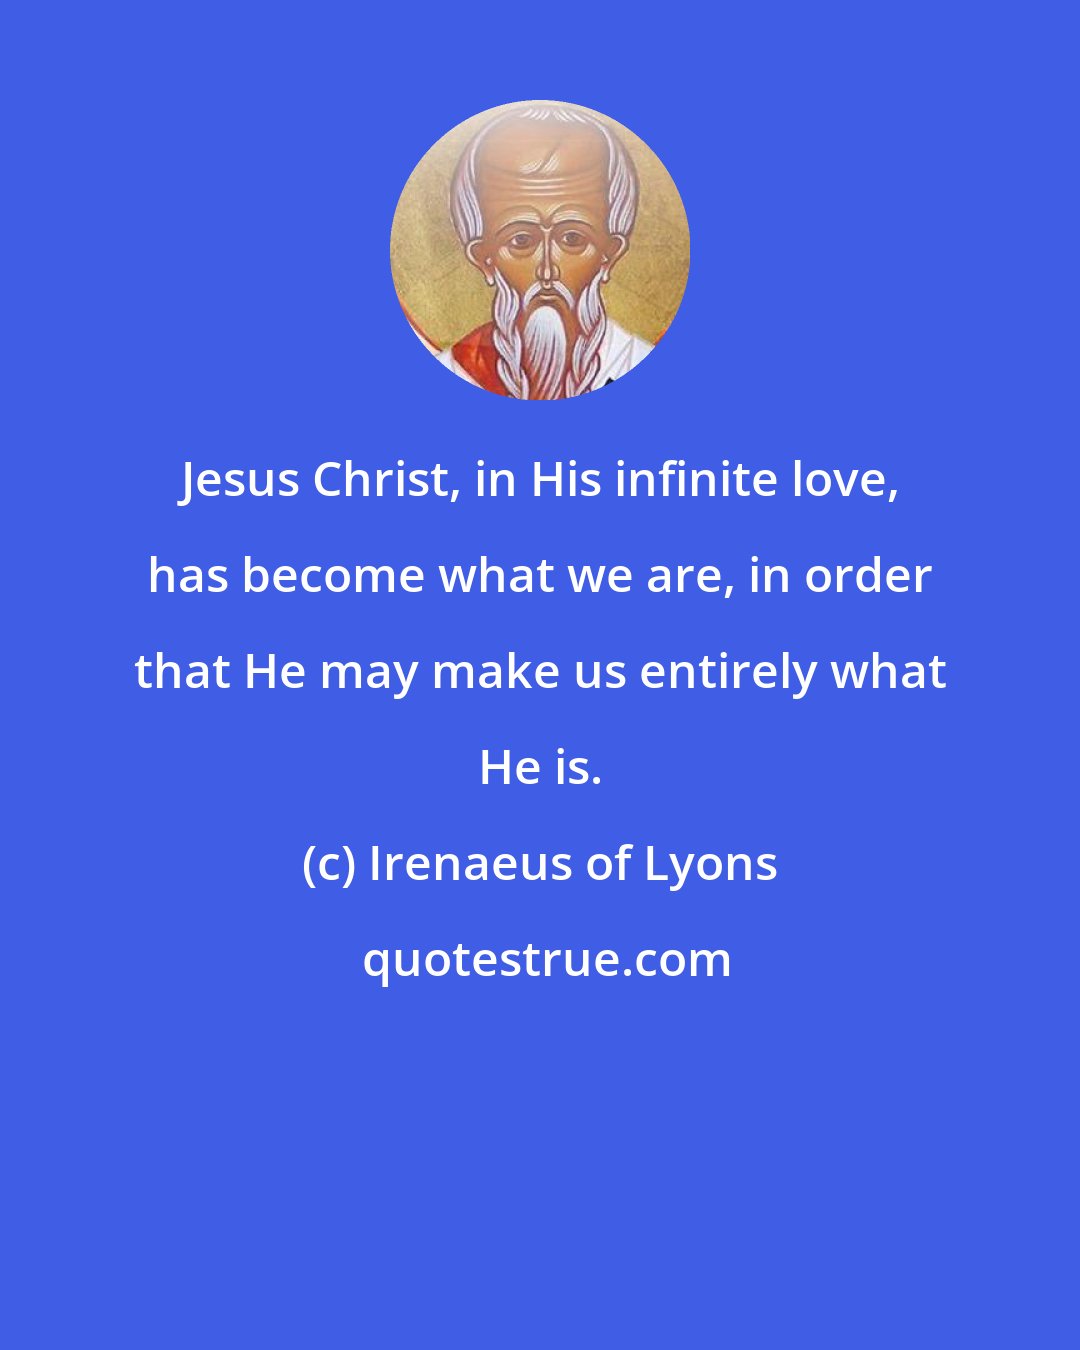 Irenaeus of Lyons: Jesus Christ, in His infinite love, has become what we are, in order that He may make us entirely what He is.